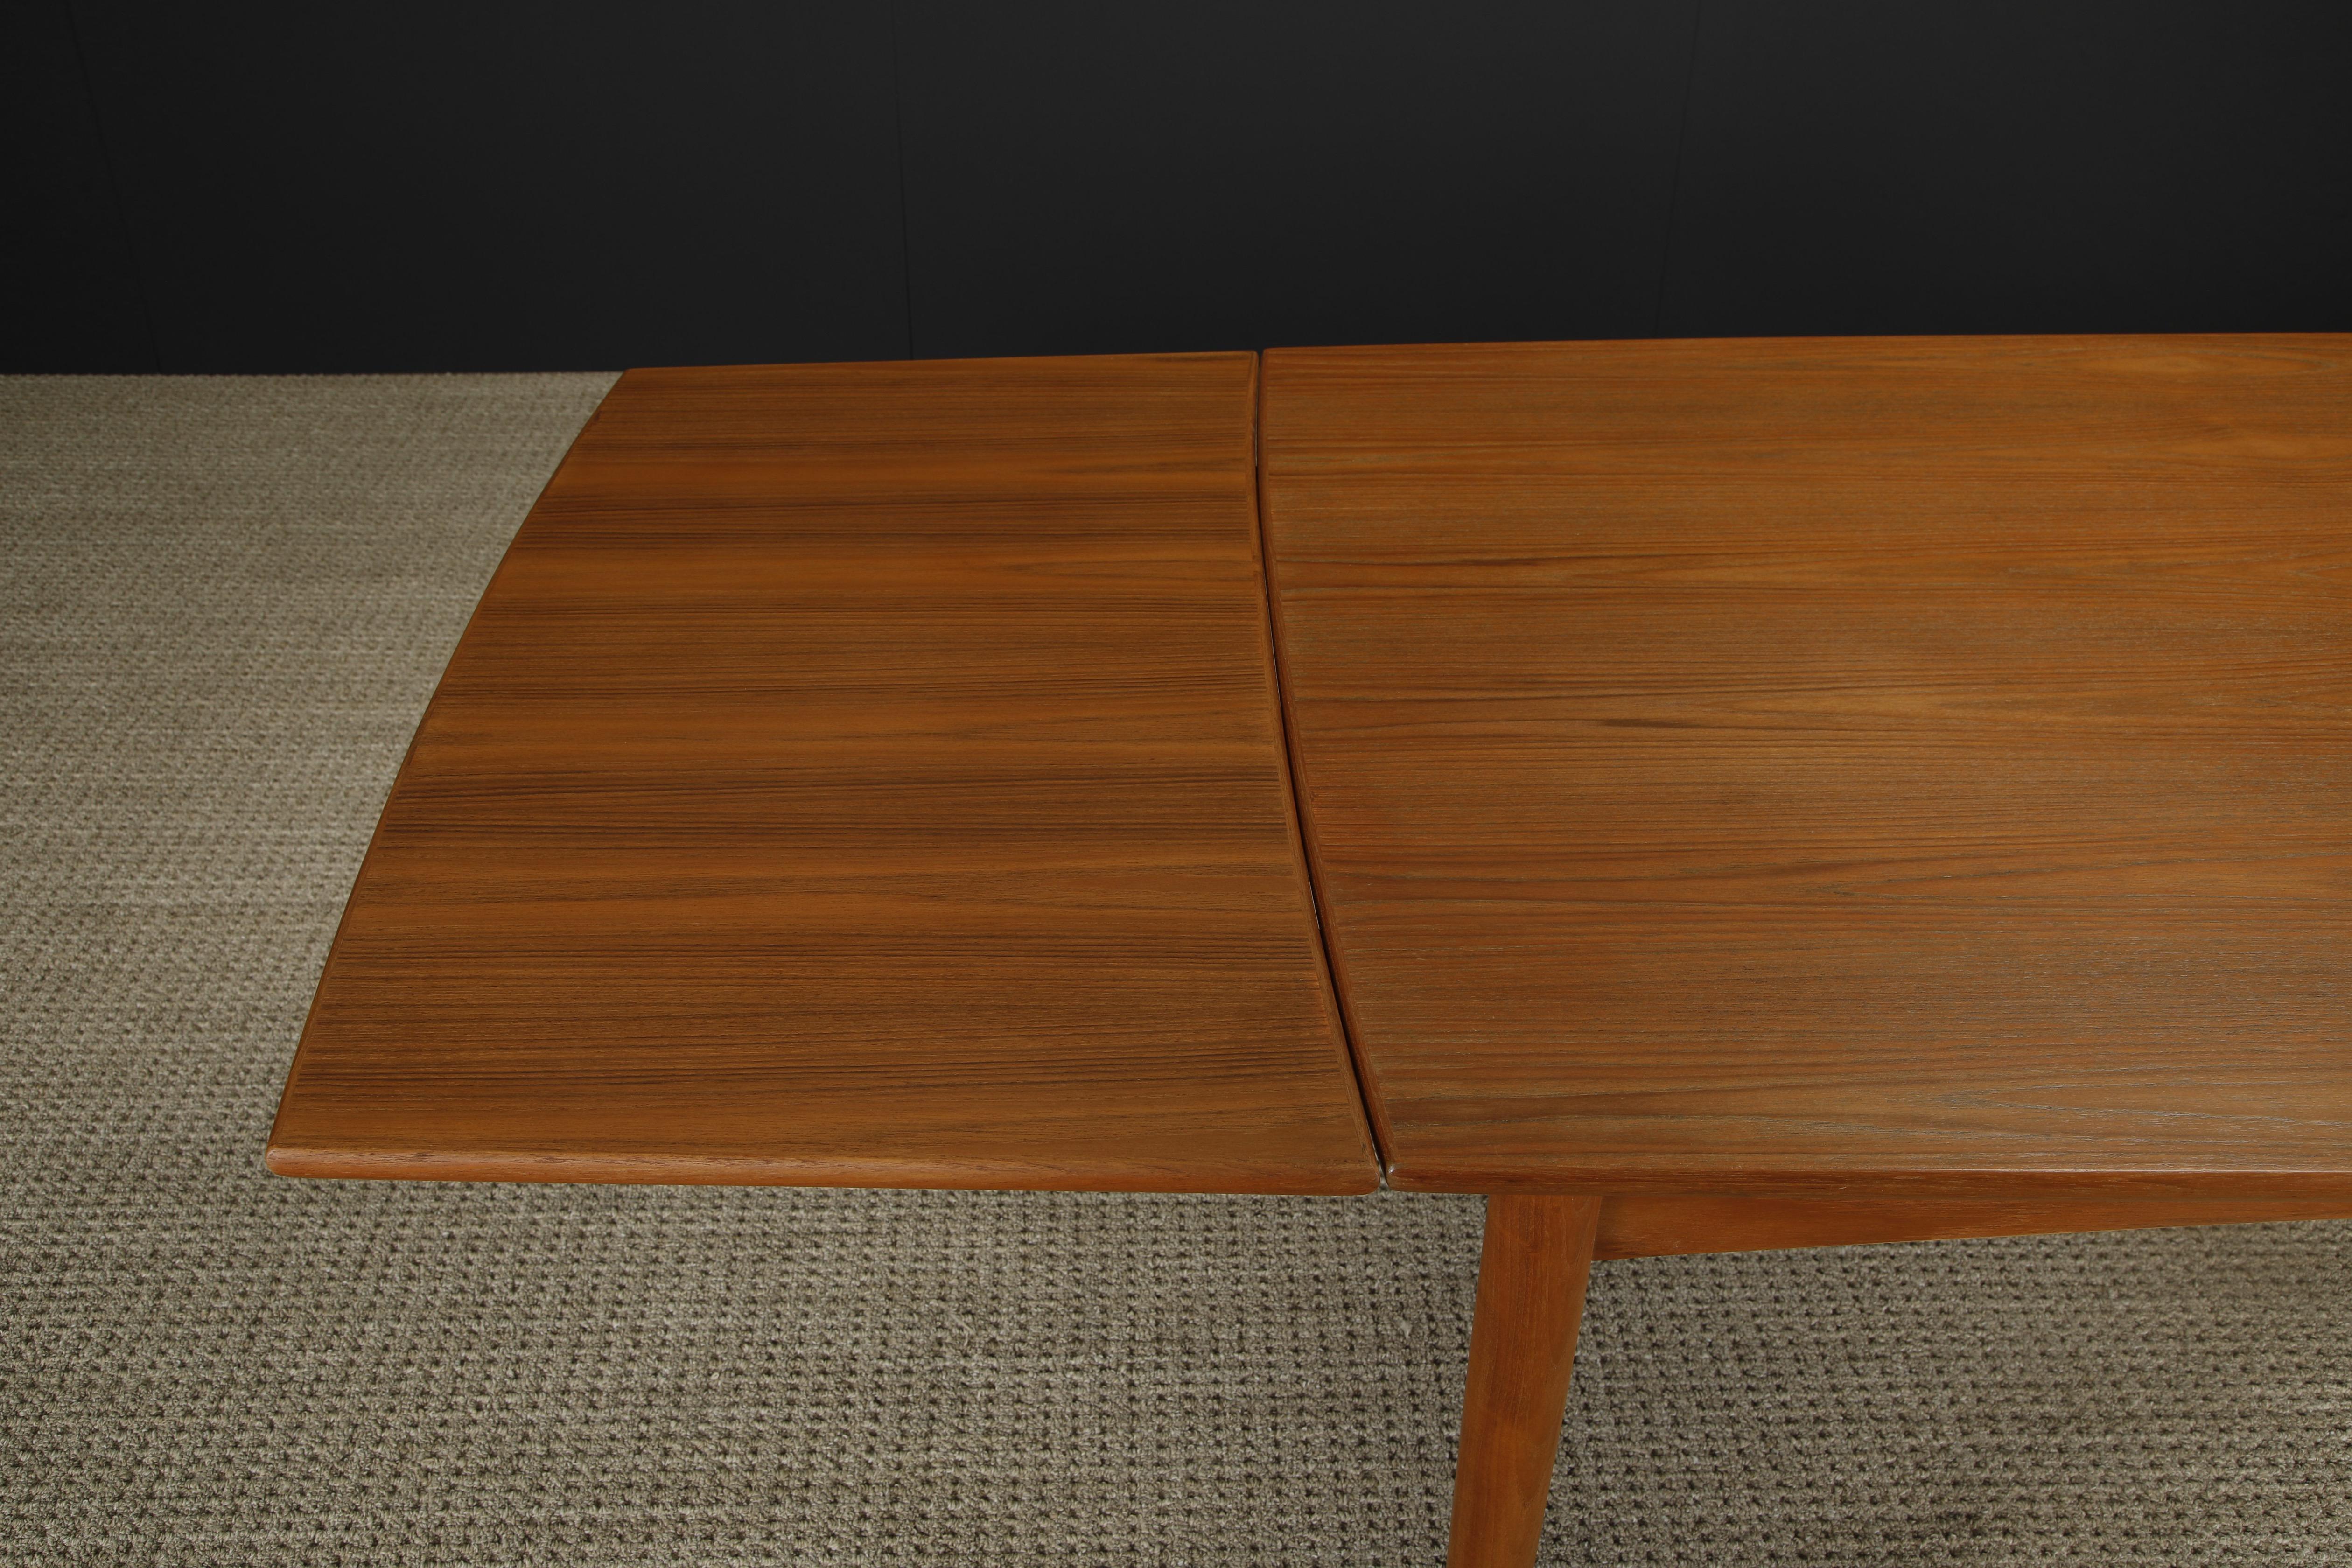 Danish Modern Expandable Teak Dining Table, c 1960s, Refinished For Sale 3